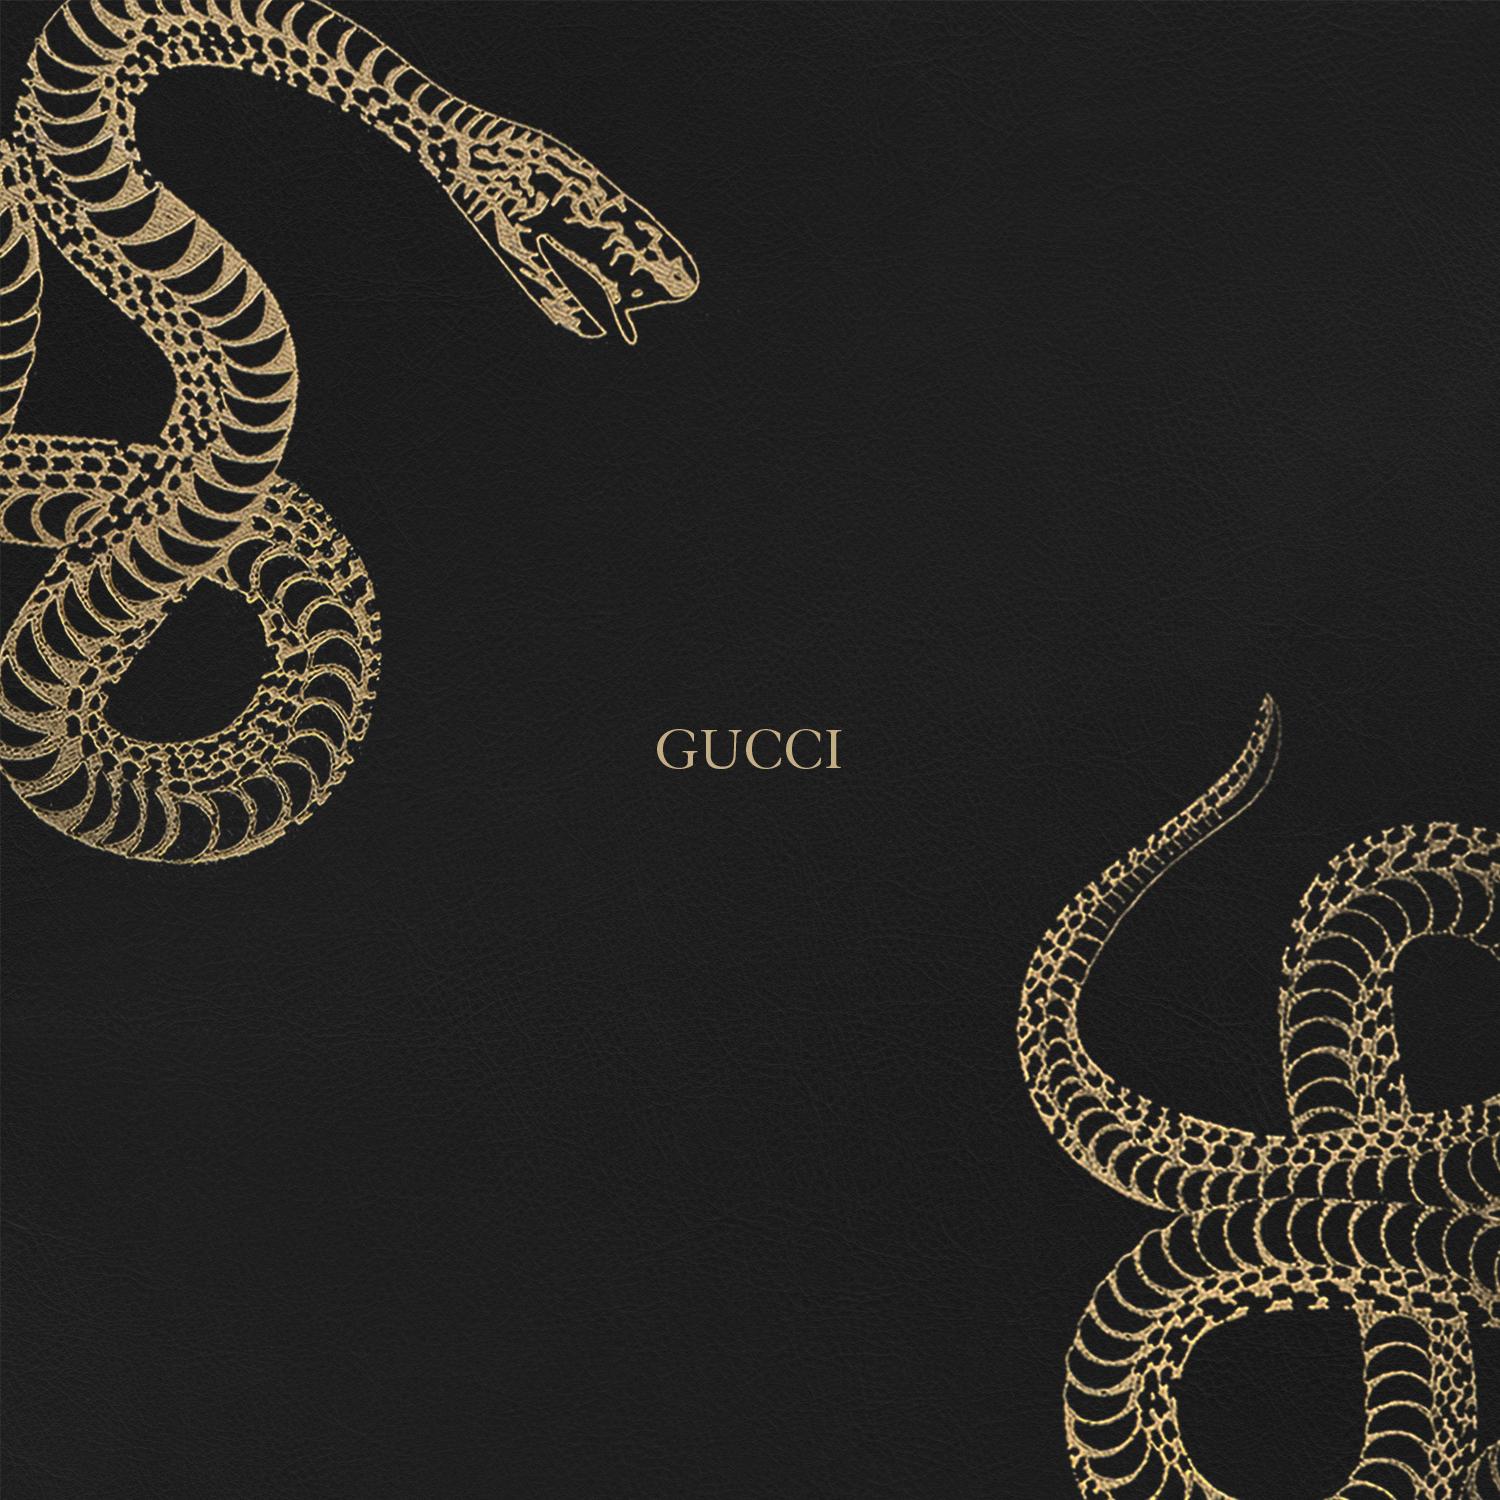 Free download LV gucci iPhone wallpaper glitter jzzgill lv in 2022